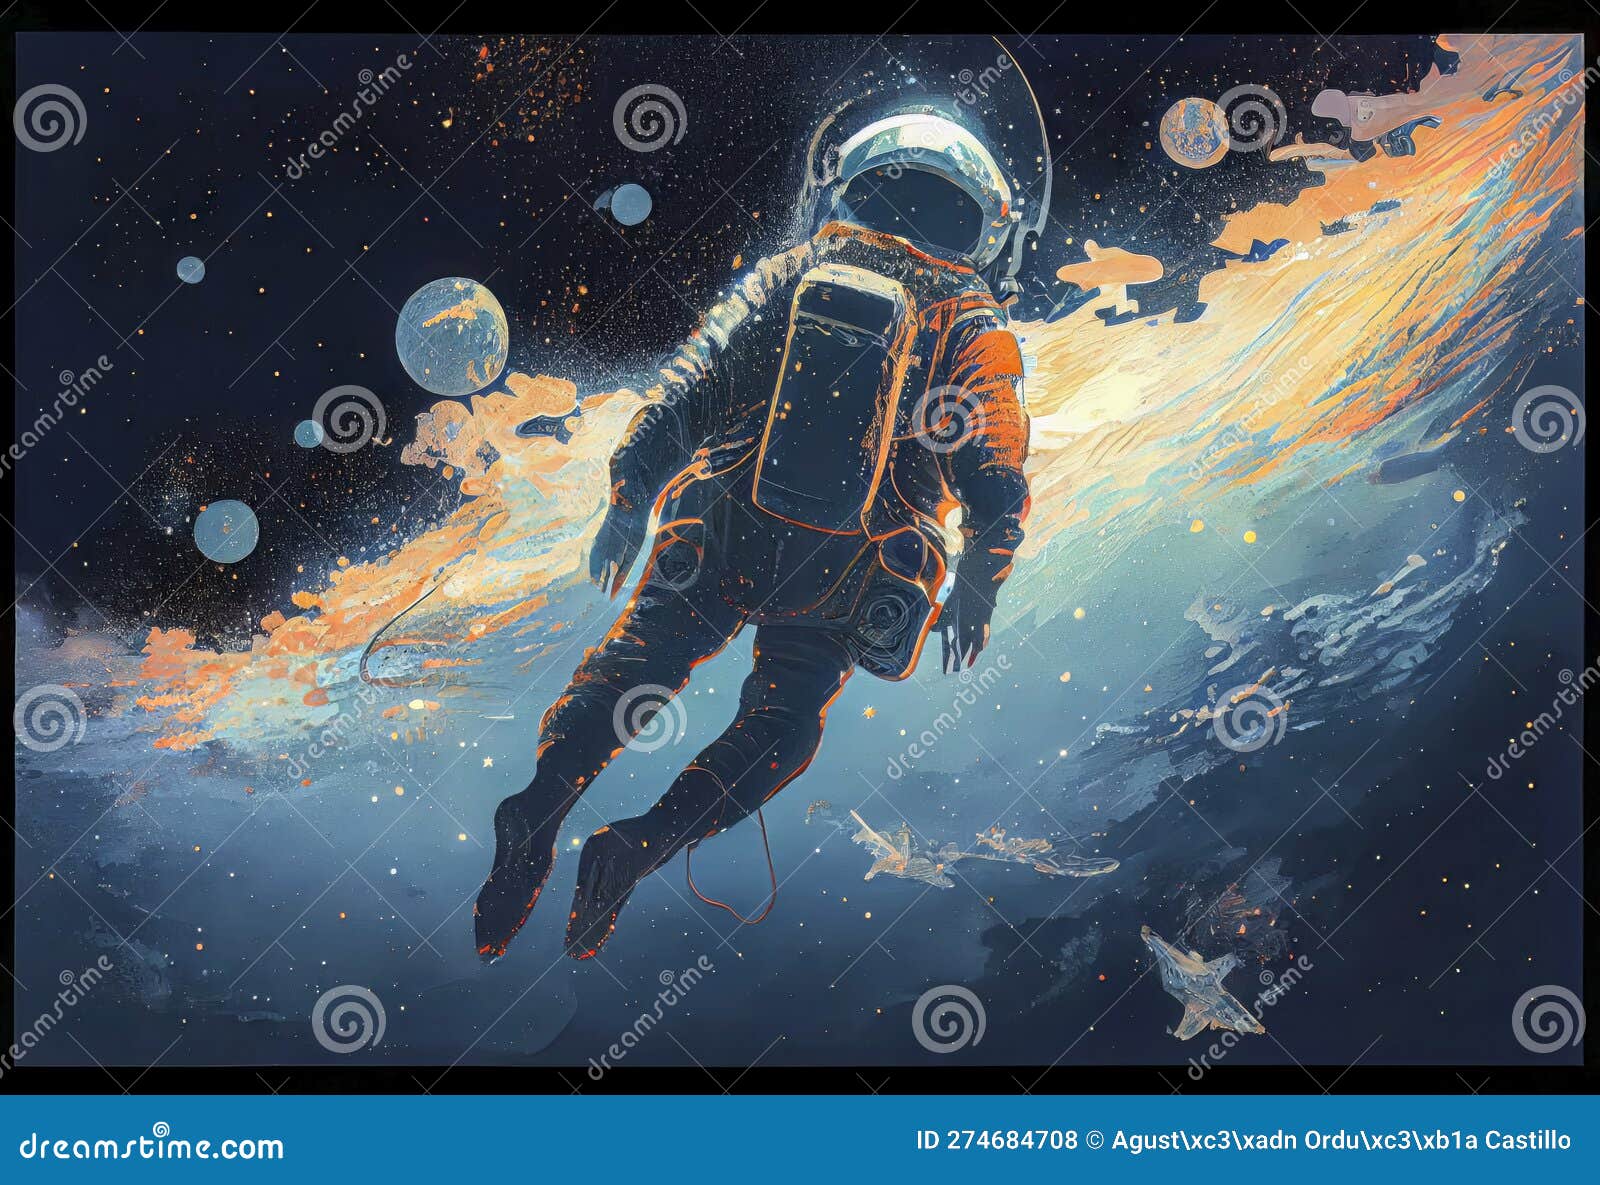 astronaut in a spacesuit gravitating in space.